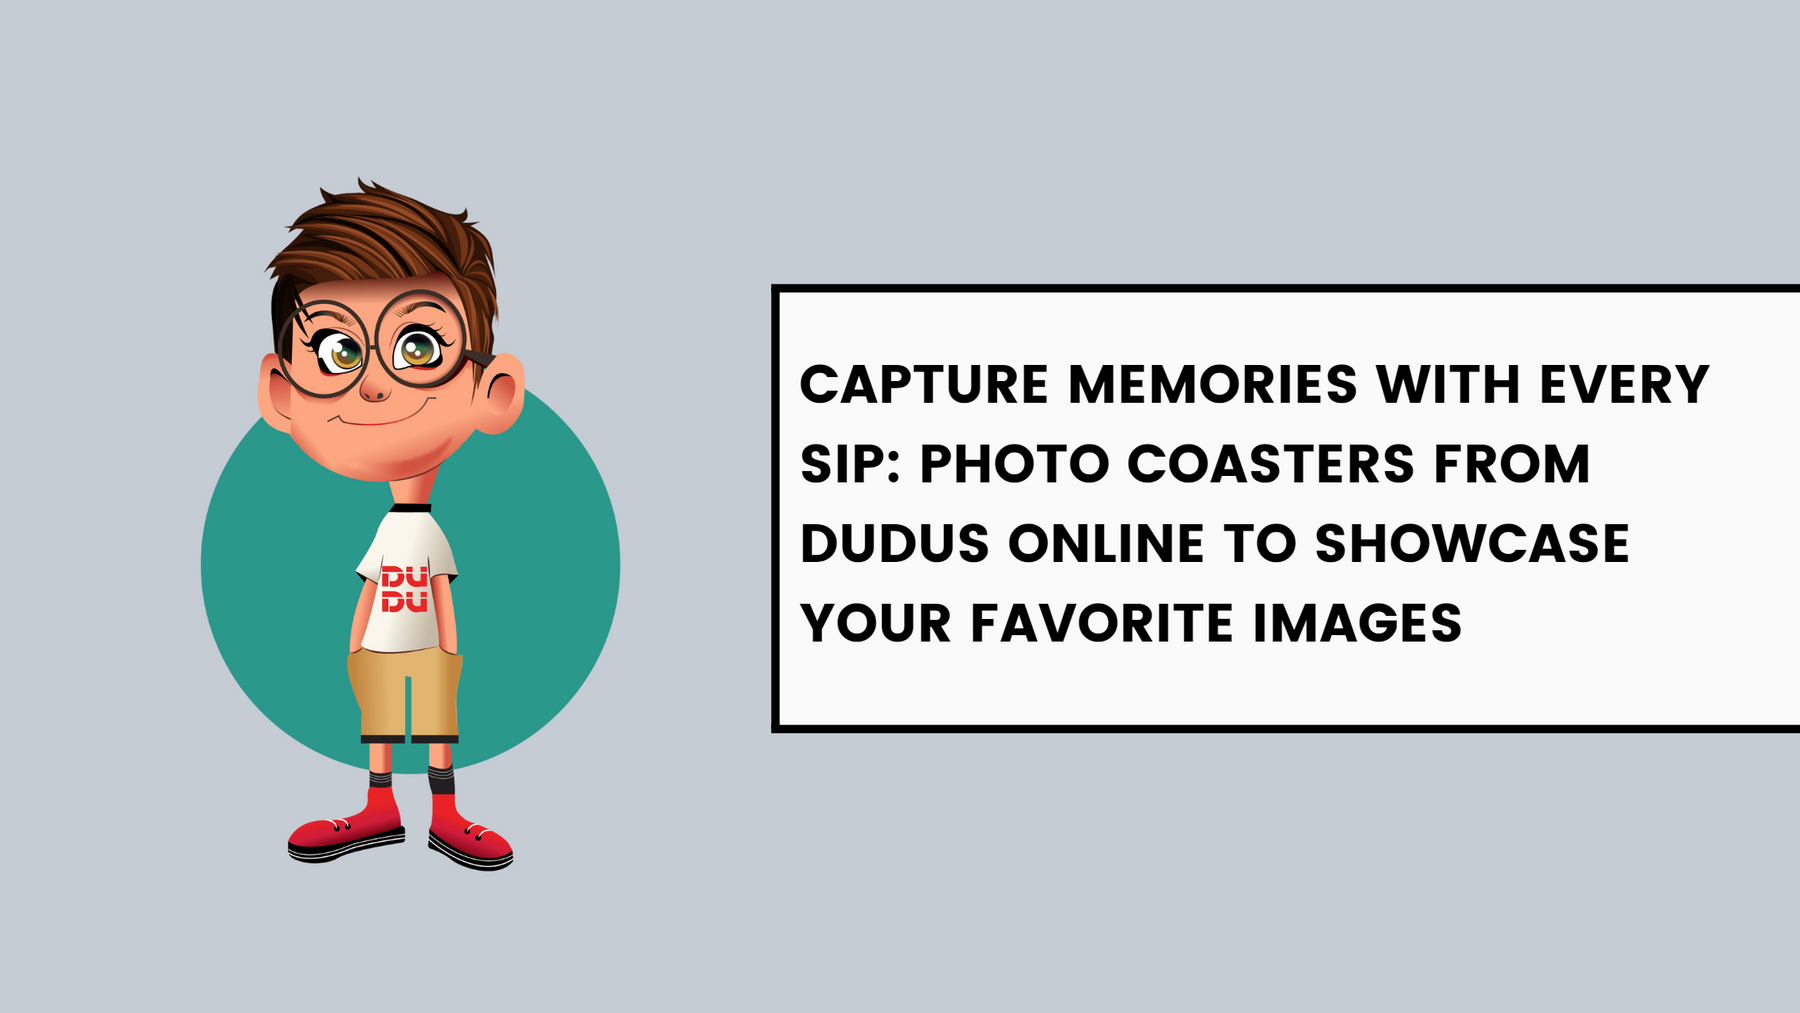 Capture Memories With Every Sip: Photo Coasters From Dudus Online To Showcase Your Favorite Images